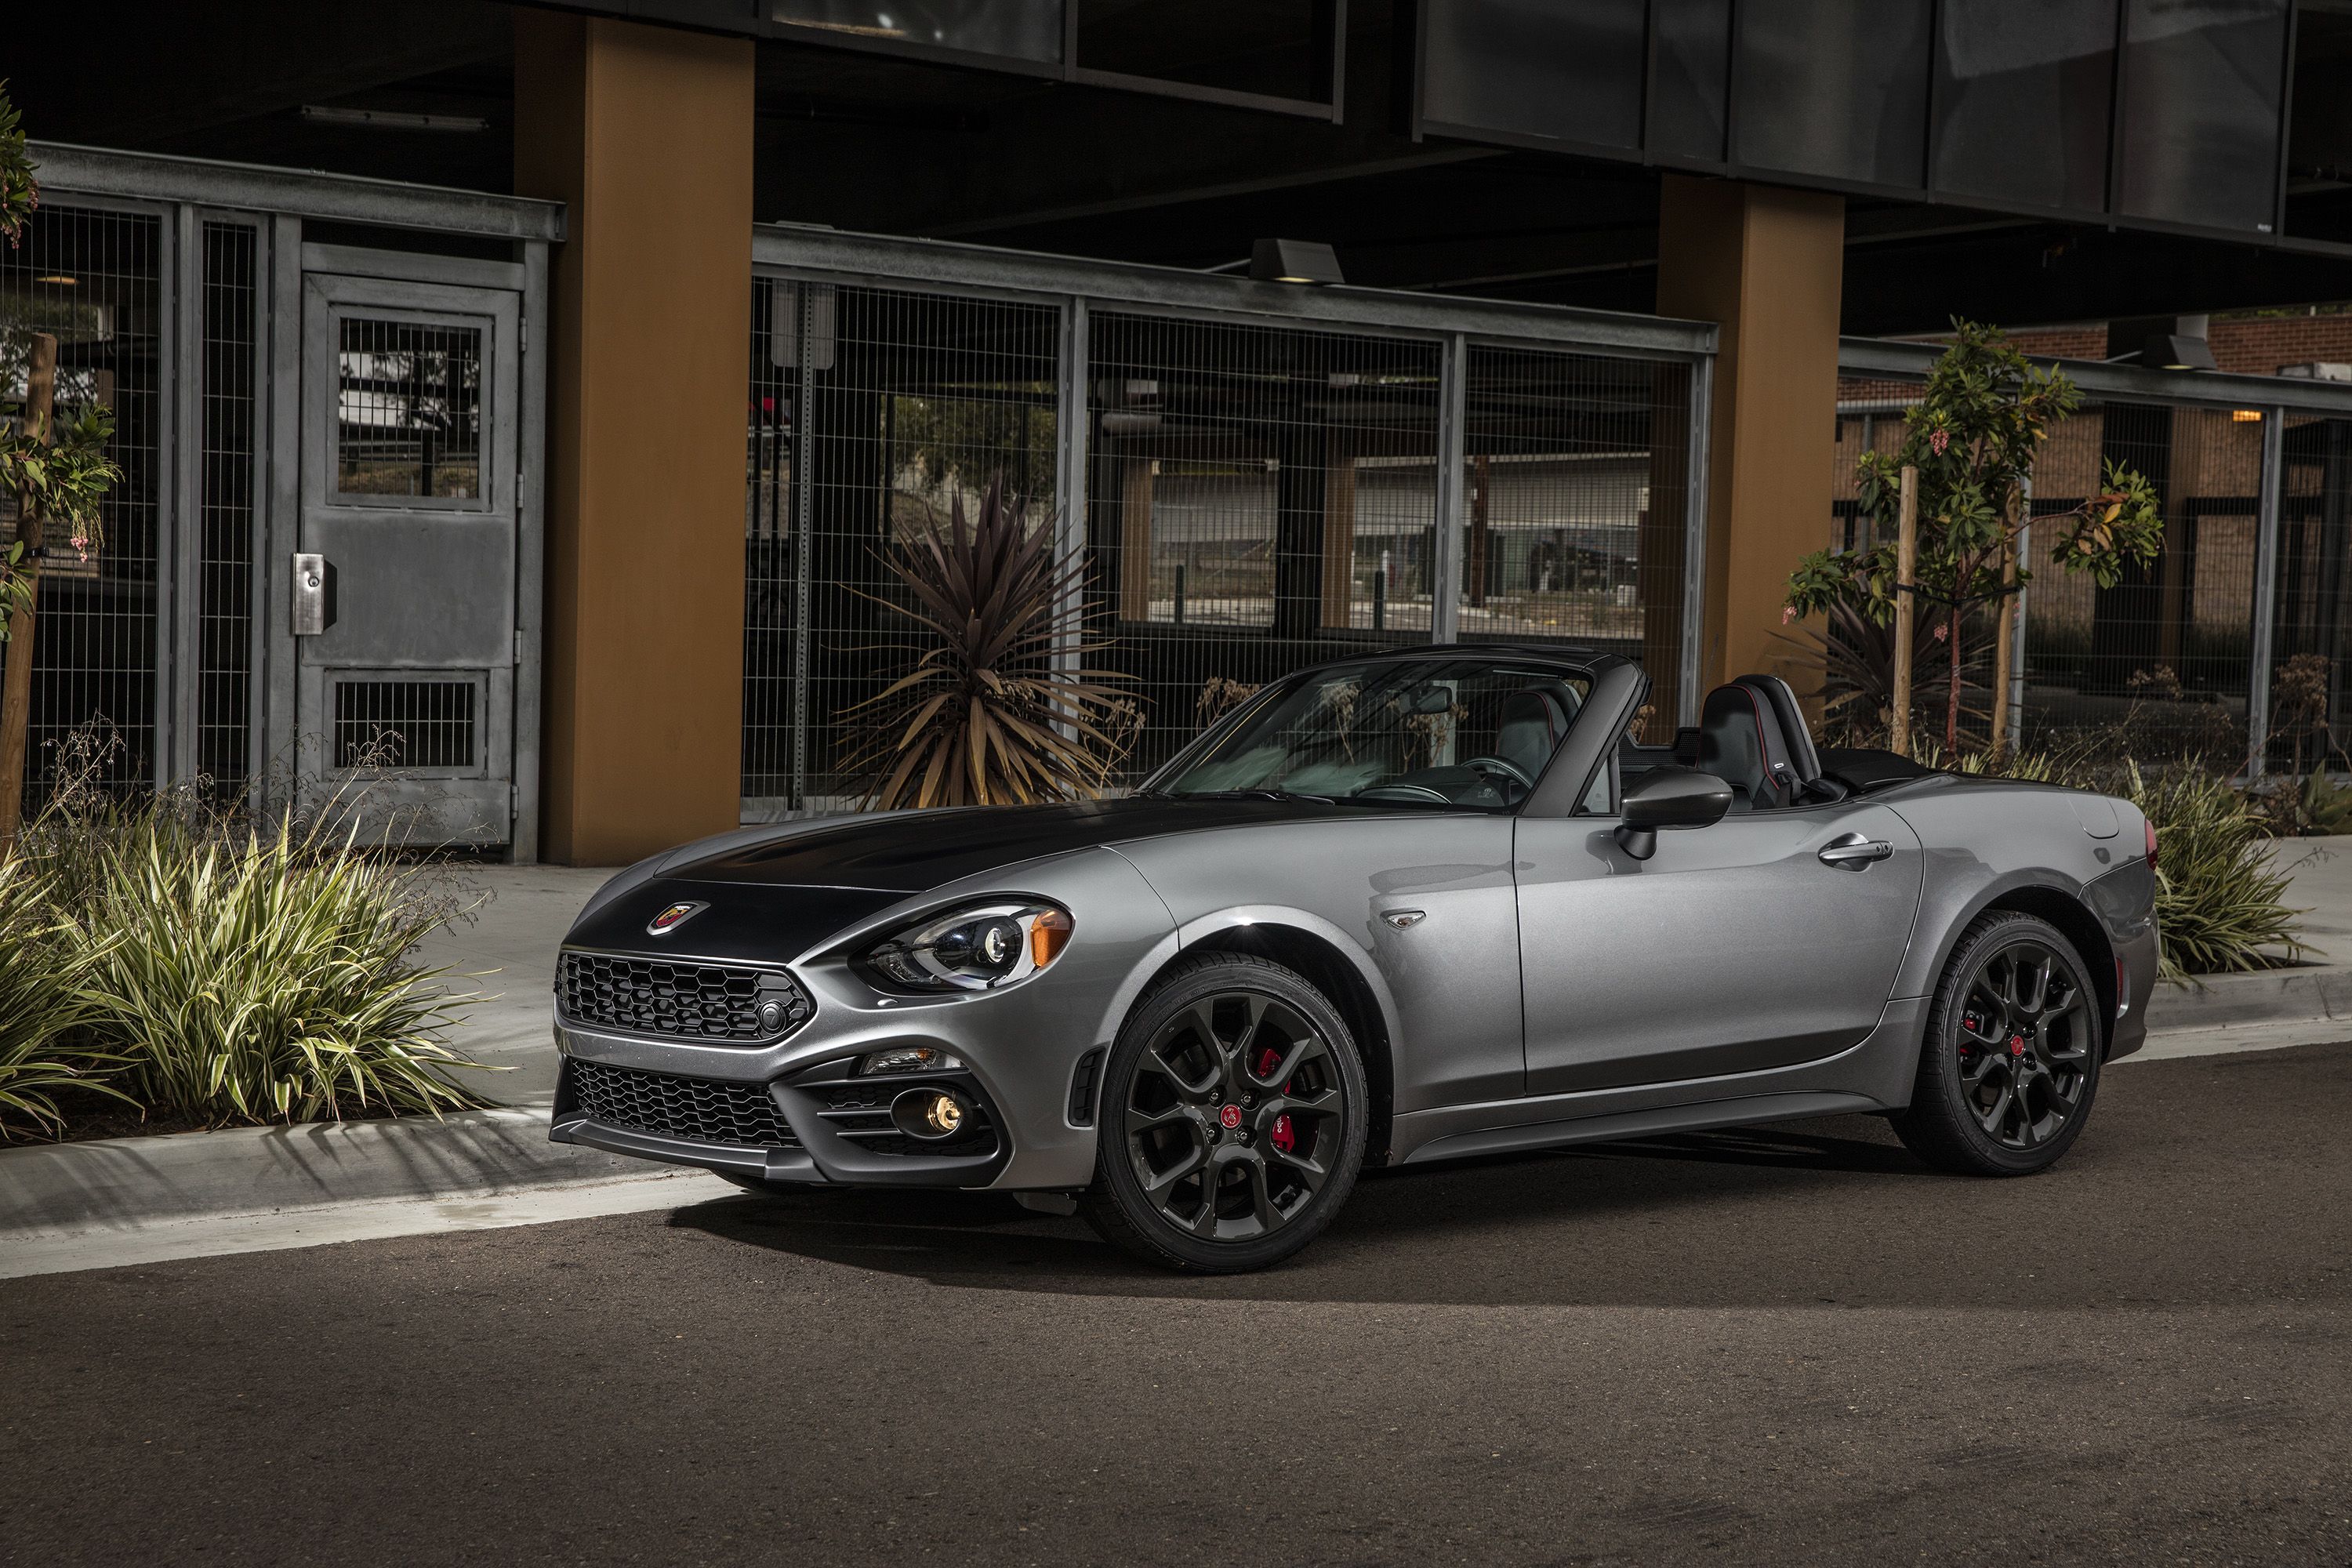 Aannames, aannames. Raad eens Afgrond Voetganger 2020 Fiat 124 Spider Review, Pricing, and Specs